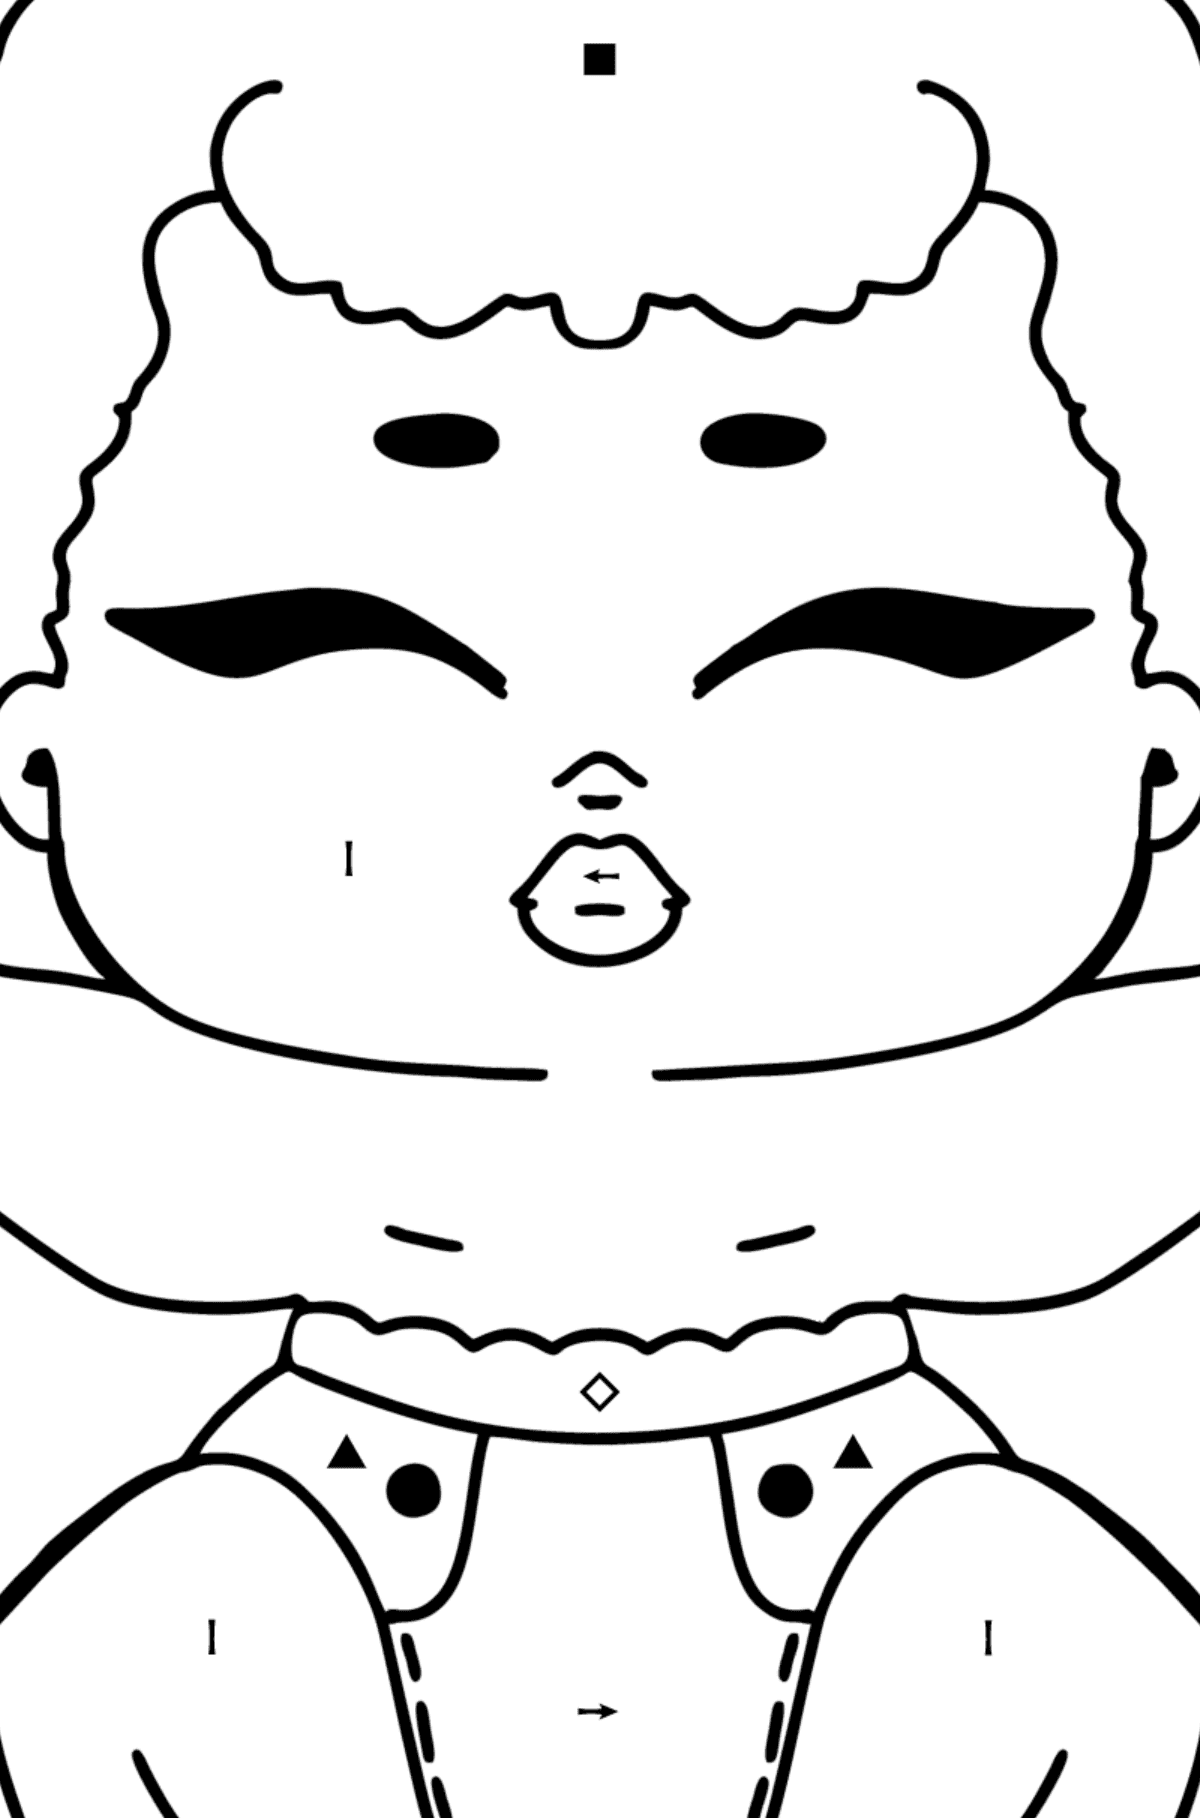 LOL Surprise Lil Sleeping B.B. coloring page - Coloring by Symbols for Kids